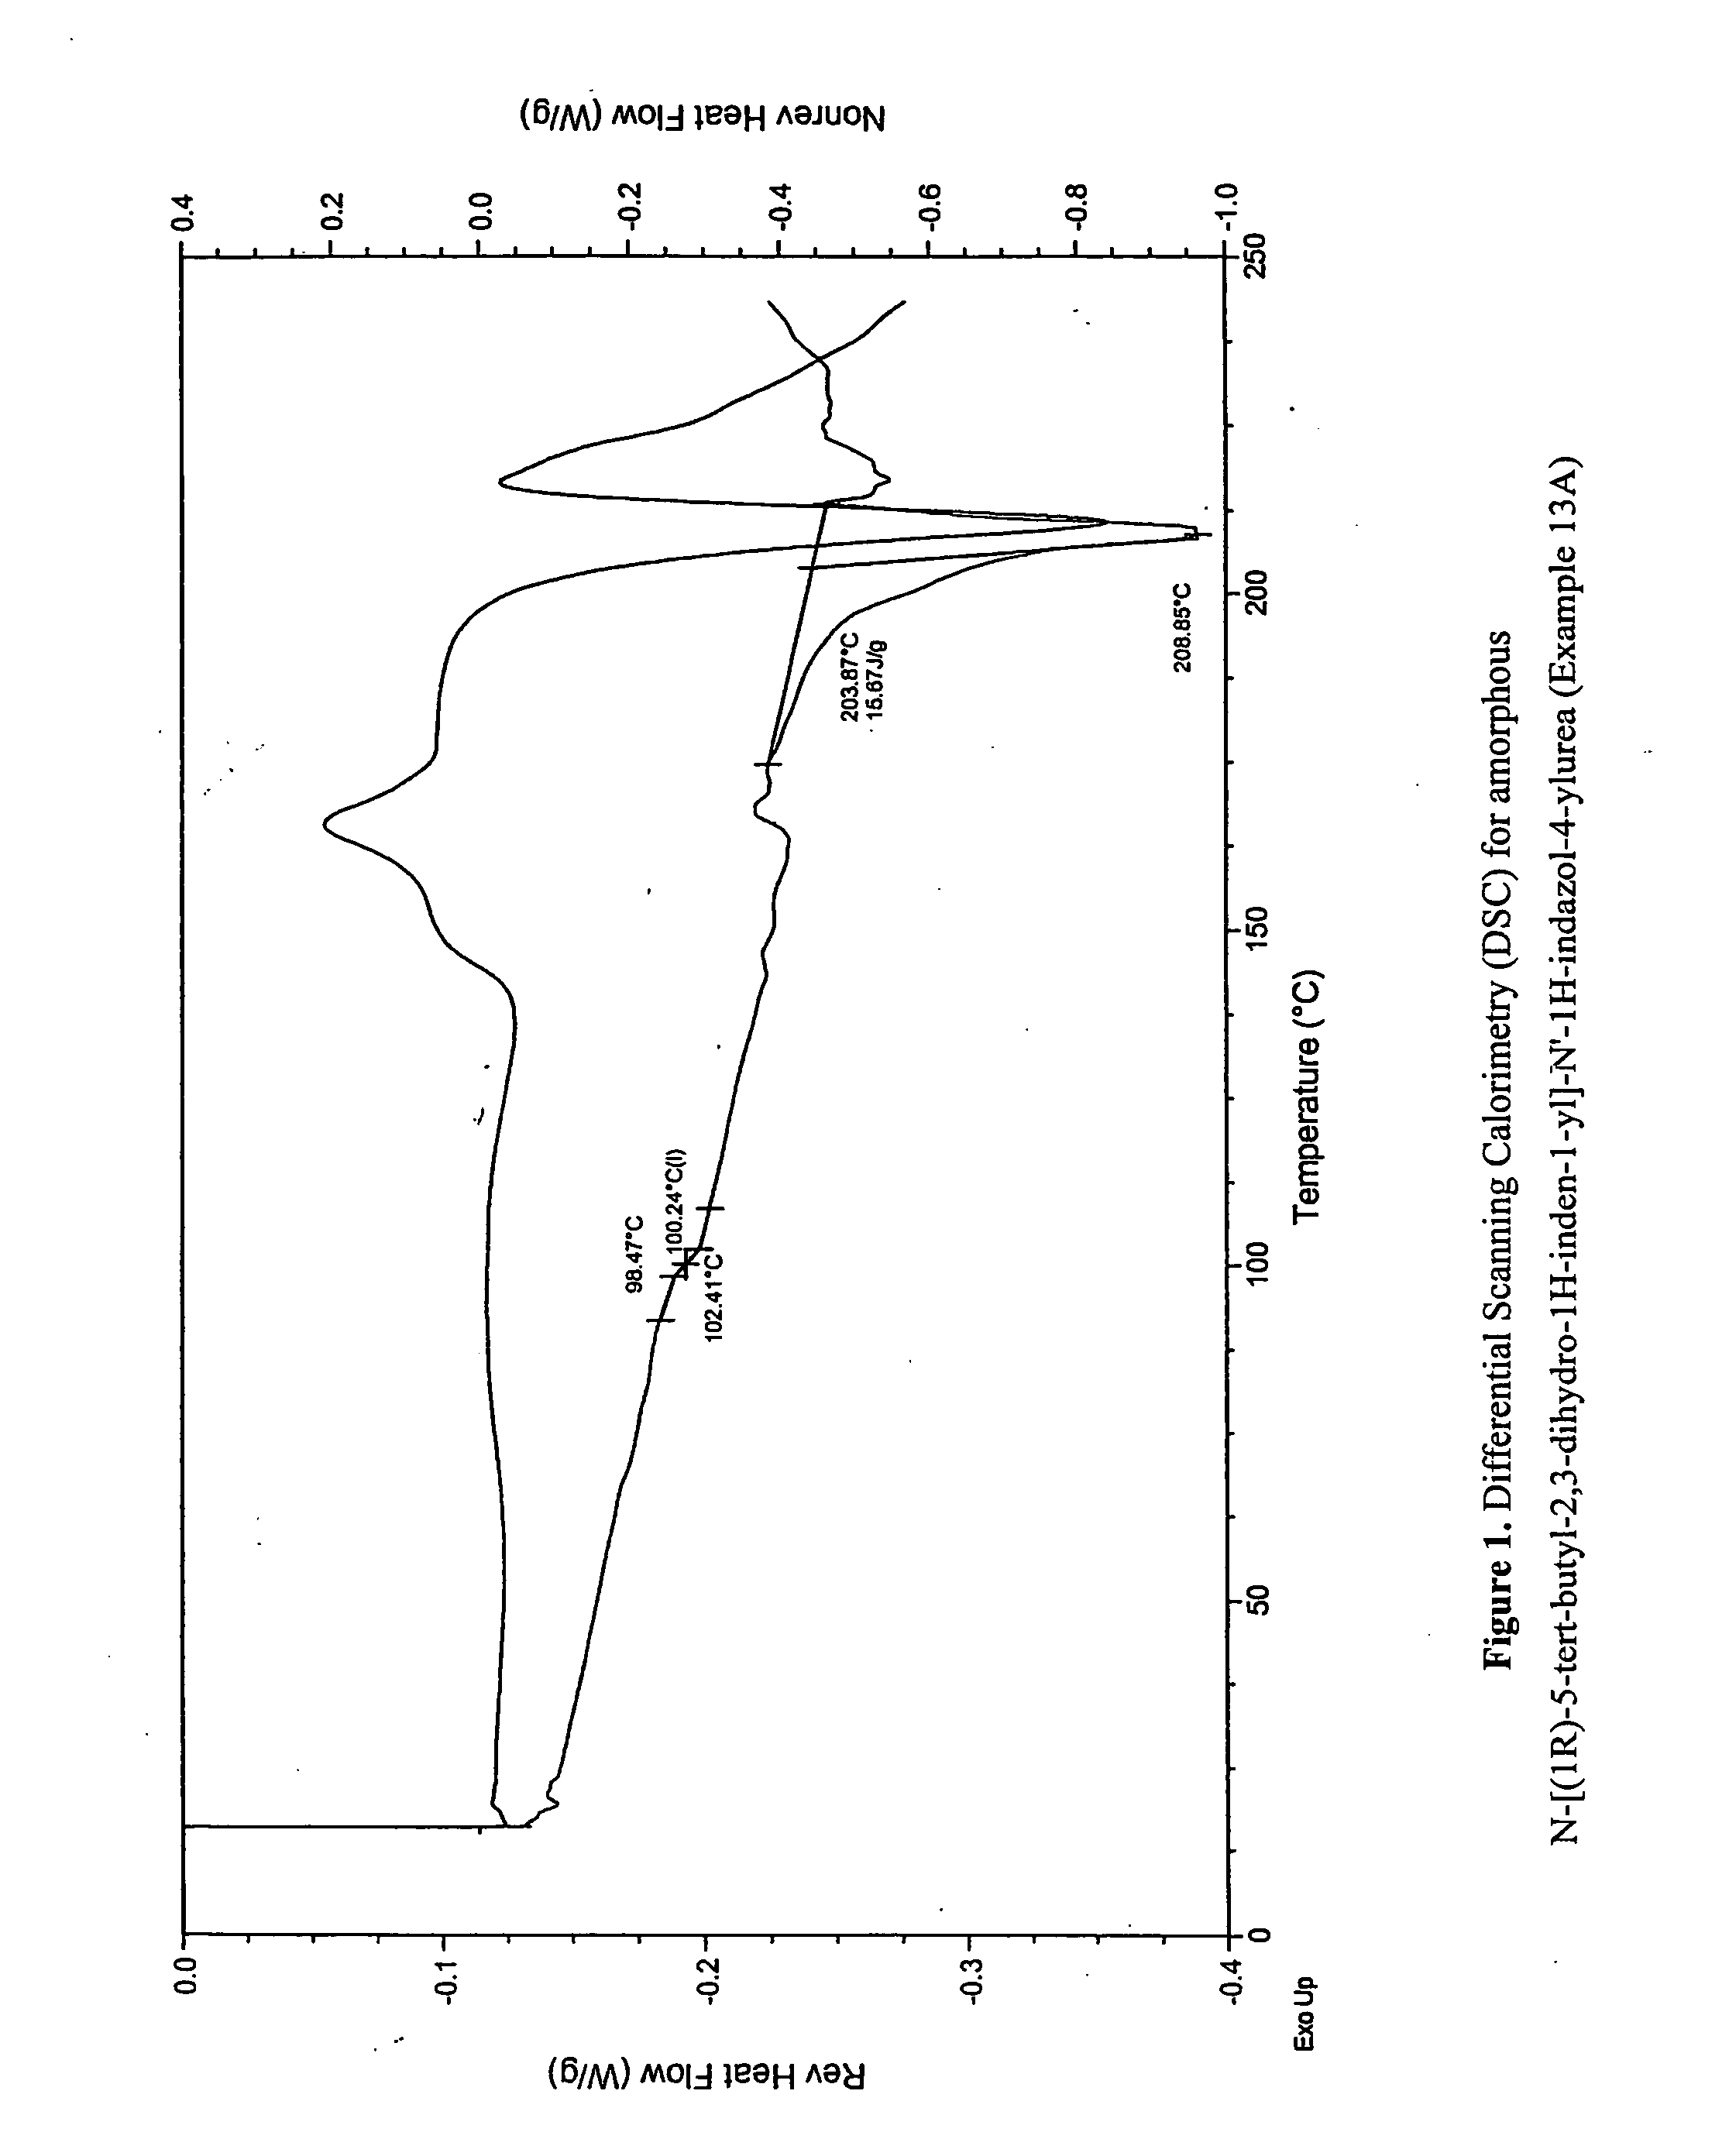 Fused compounds that inhibit vanilloid receptor subtype 1 (VR1) receptor